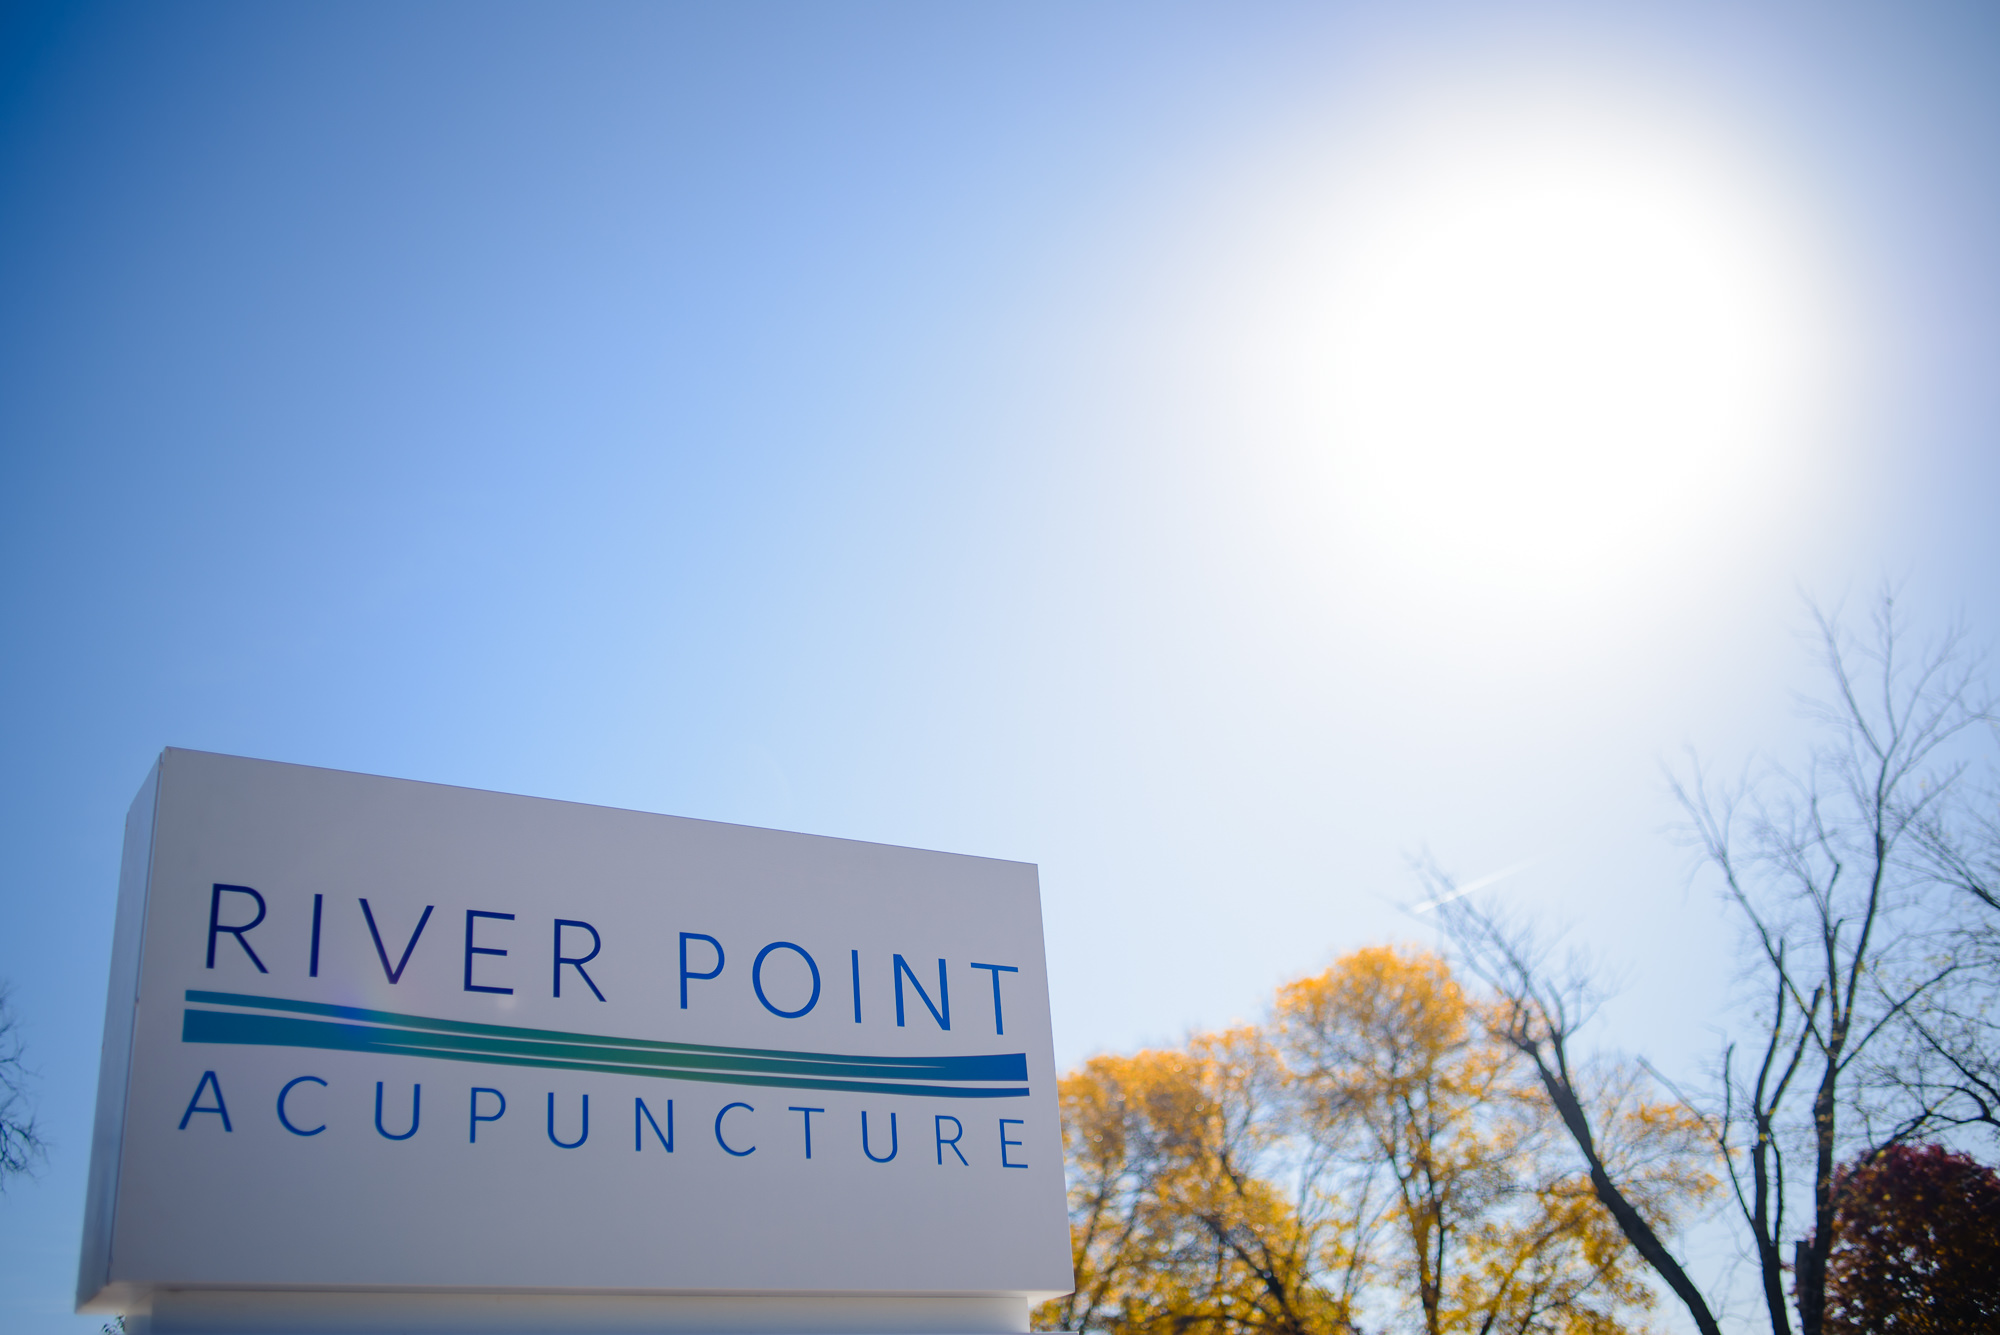 River Point Acupuncture, LLC